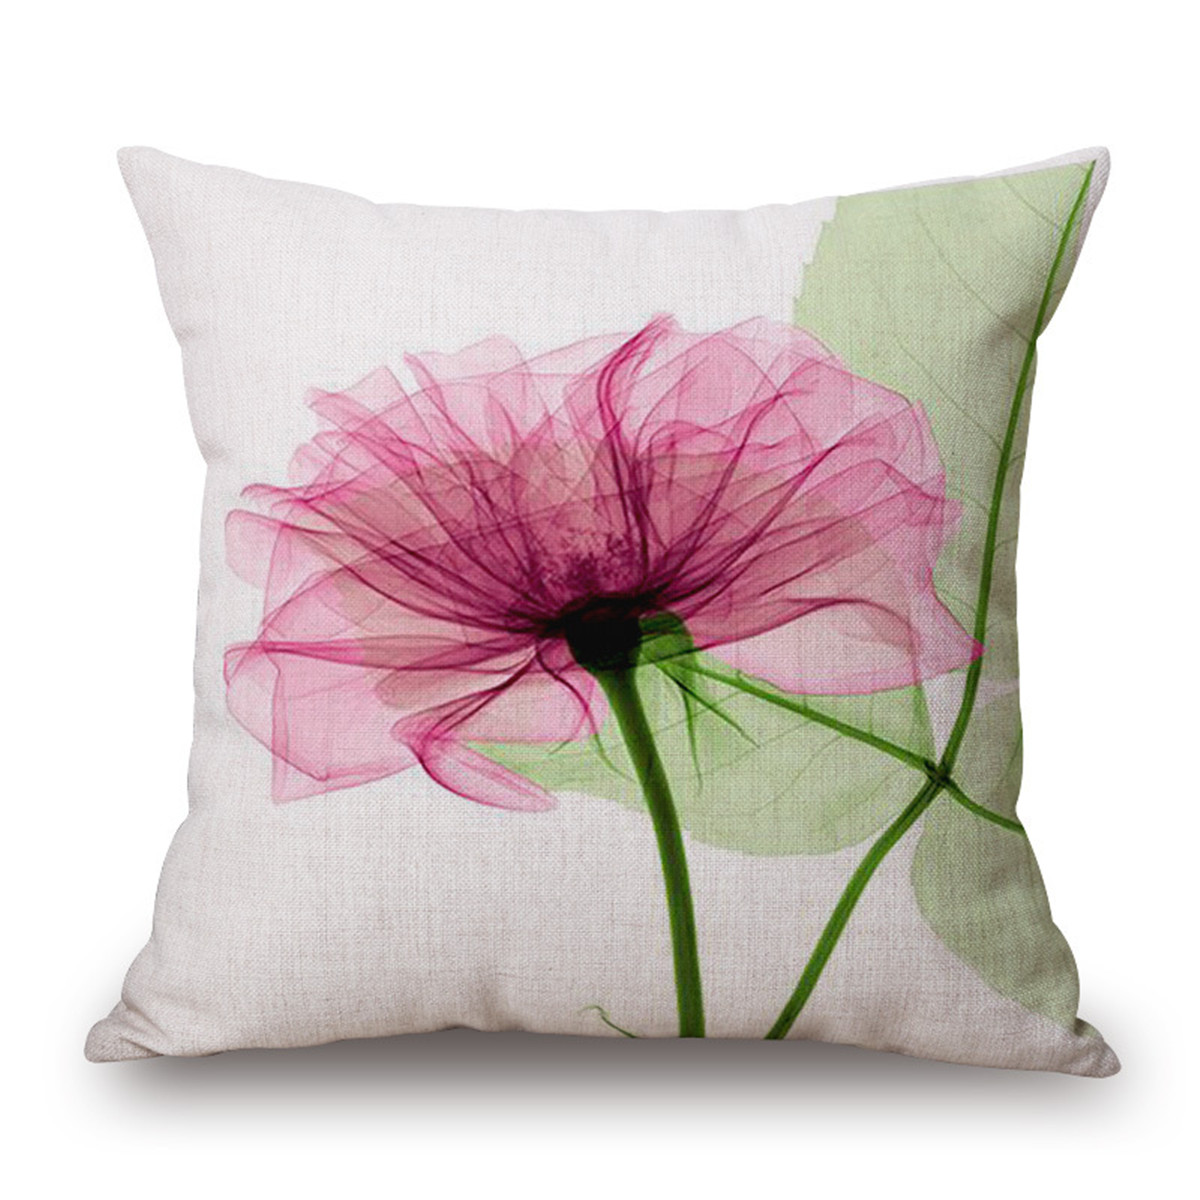 Ink-Painting-Flowers-Cotton-Linen-Pillow-Case-Tulips-Sofa-Cushion-Cover-45x45cm-1161674-8